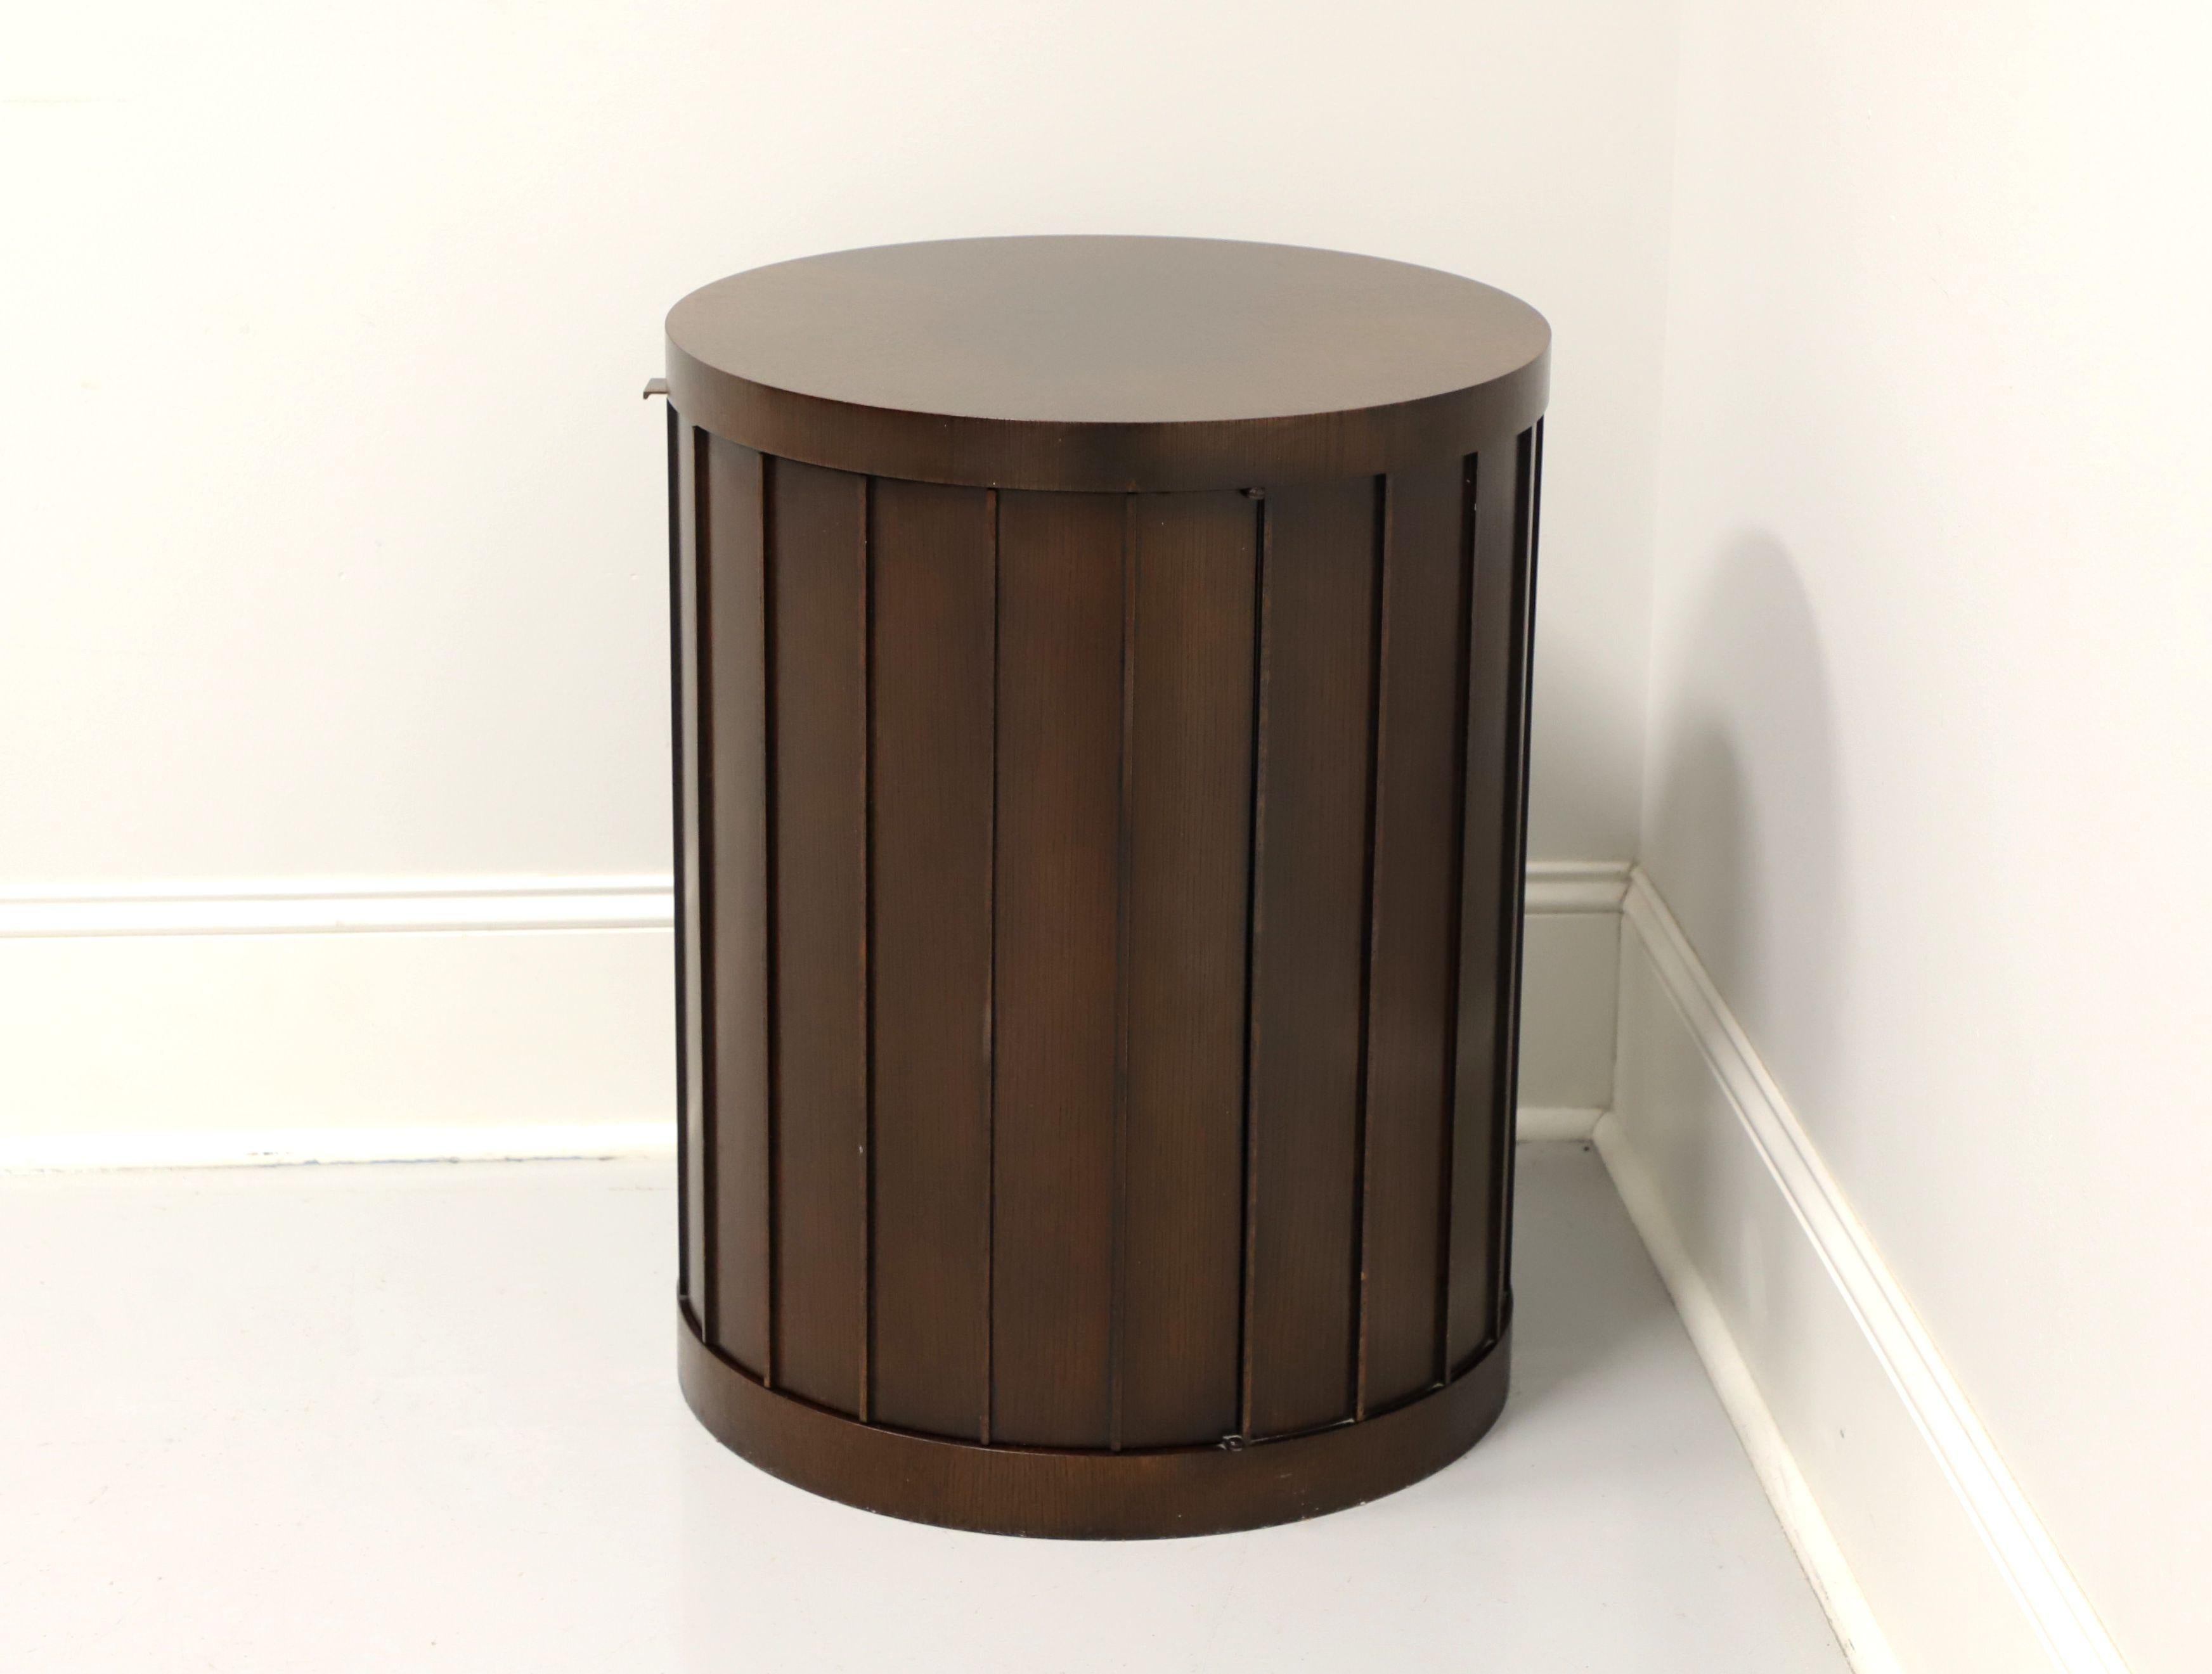 Modern Barbara Barry for Baker Contemporary Mahogany Round Cabinet Accent Table